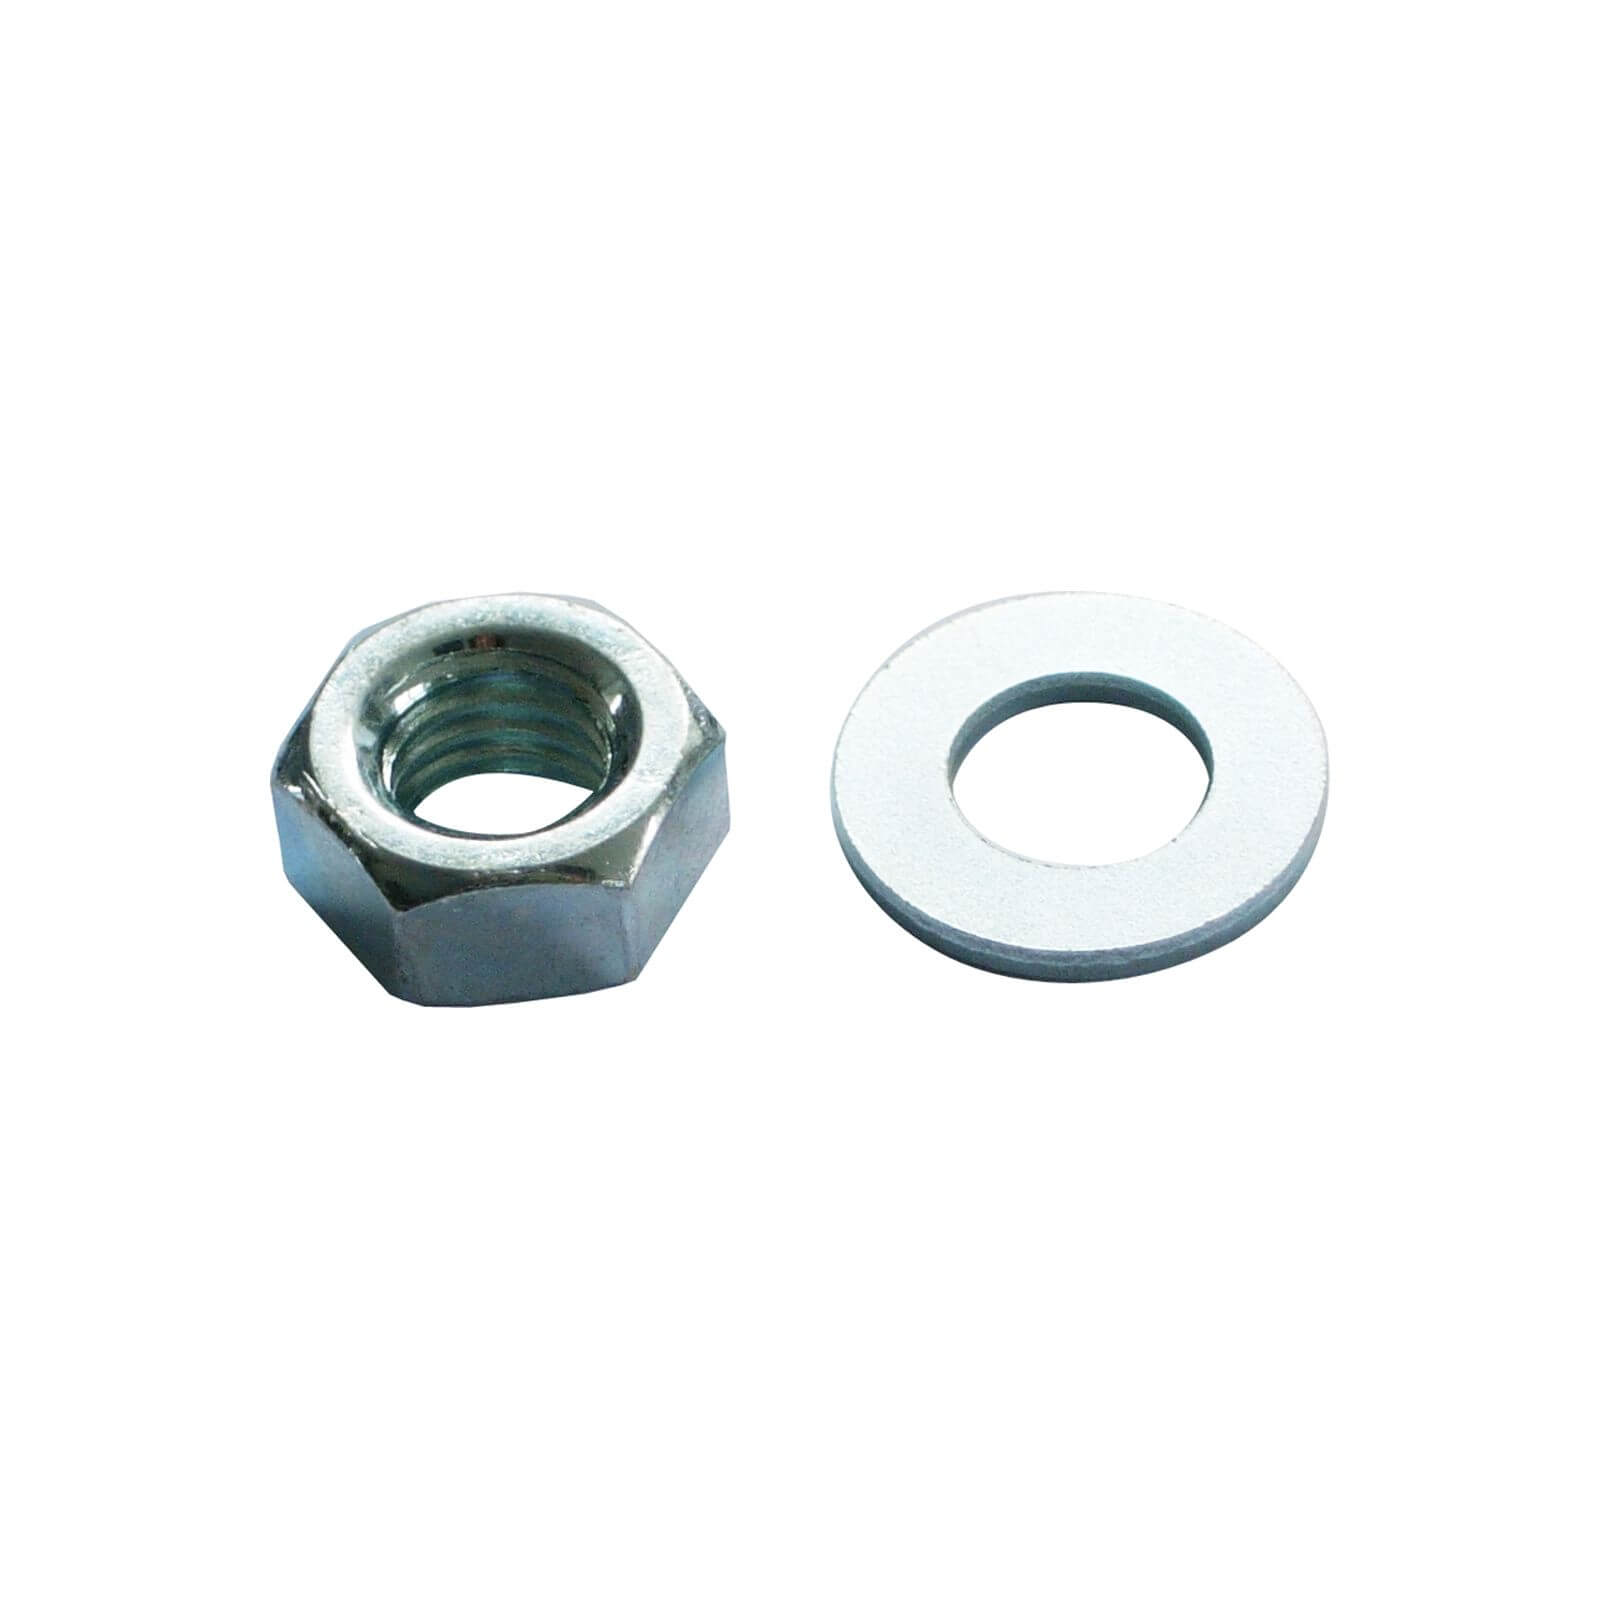 Hex Nut & Washer - Bright Zinc Plated - M8 - 10 Pack